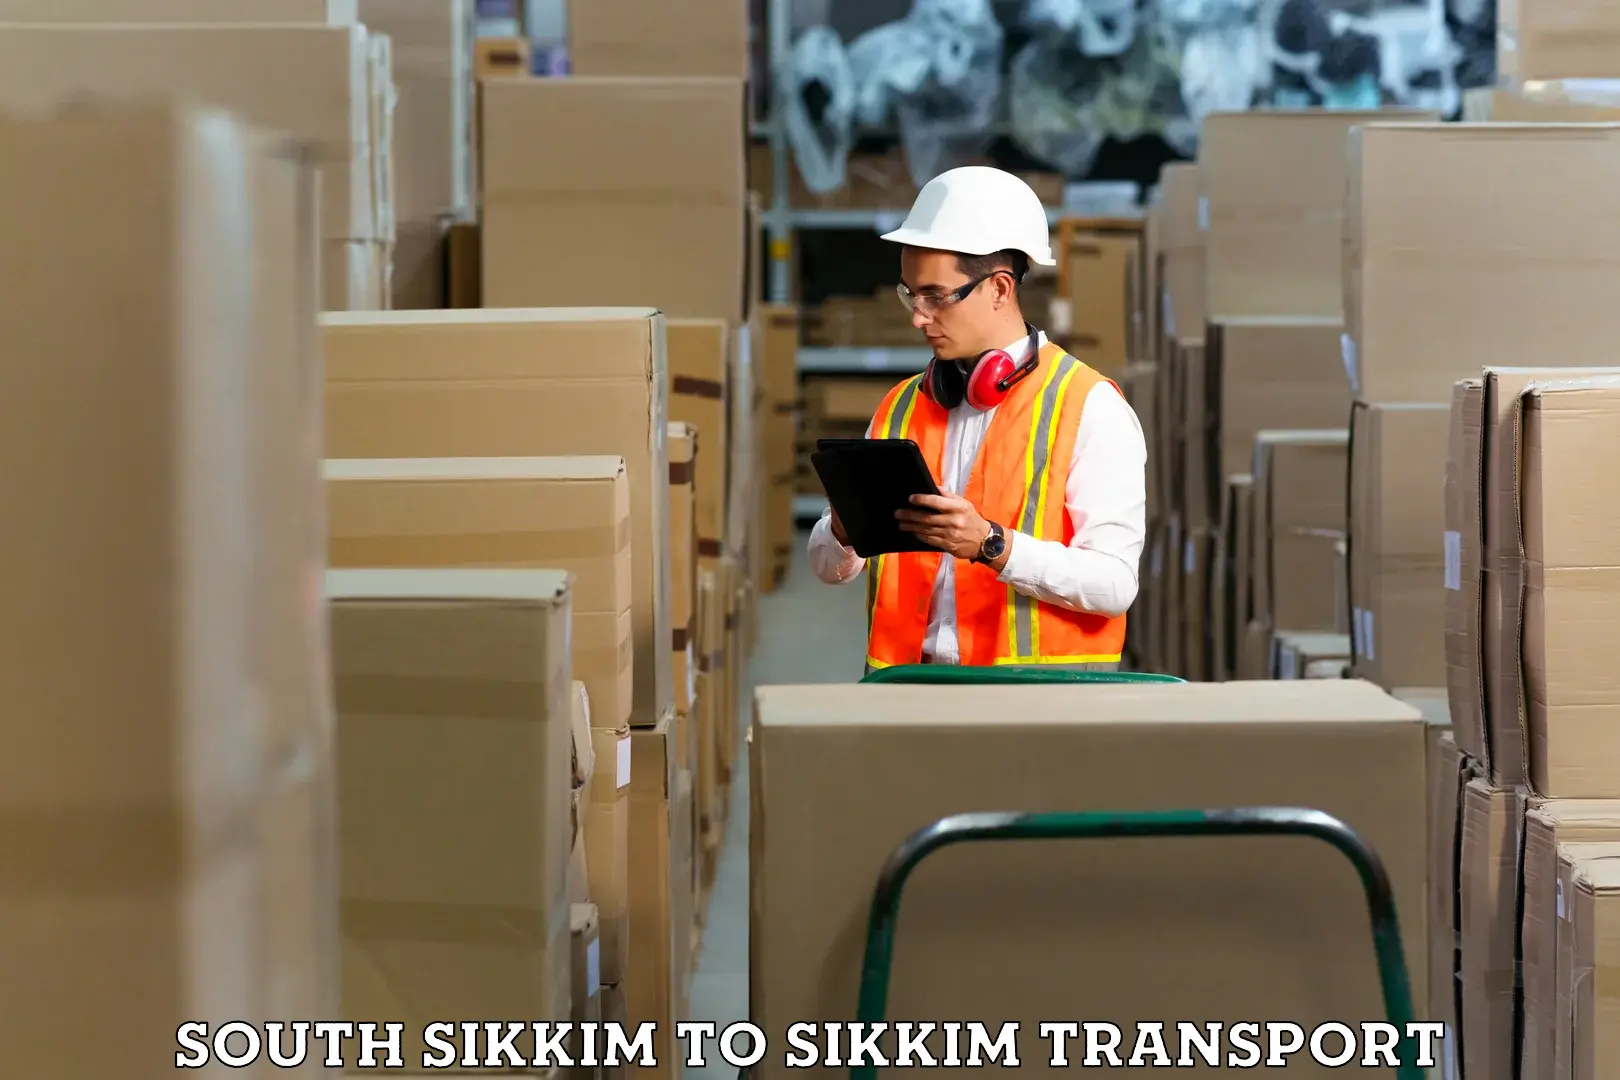 Furniture transport service South Sikkim to North Sikkim